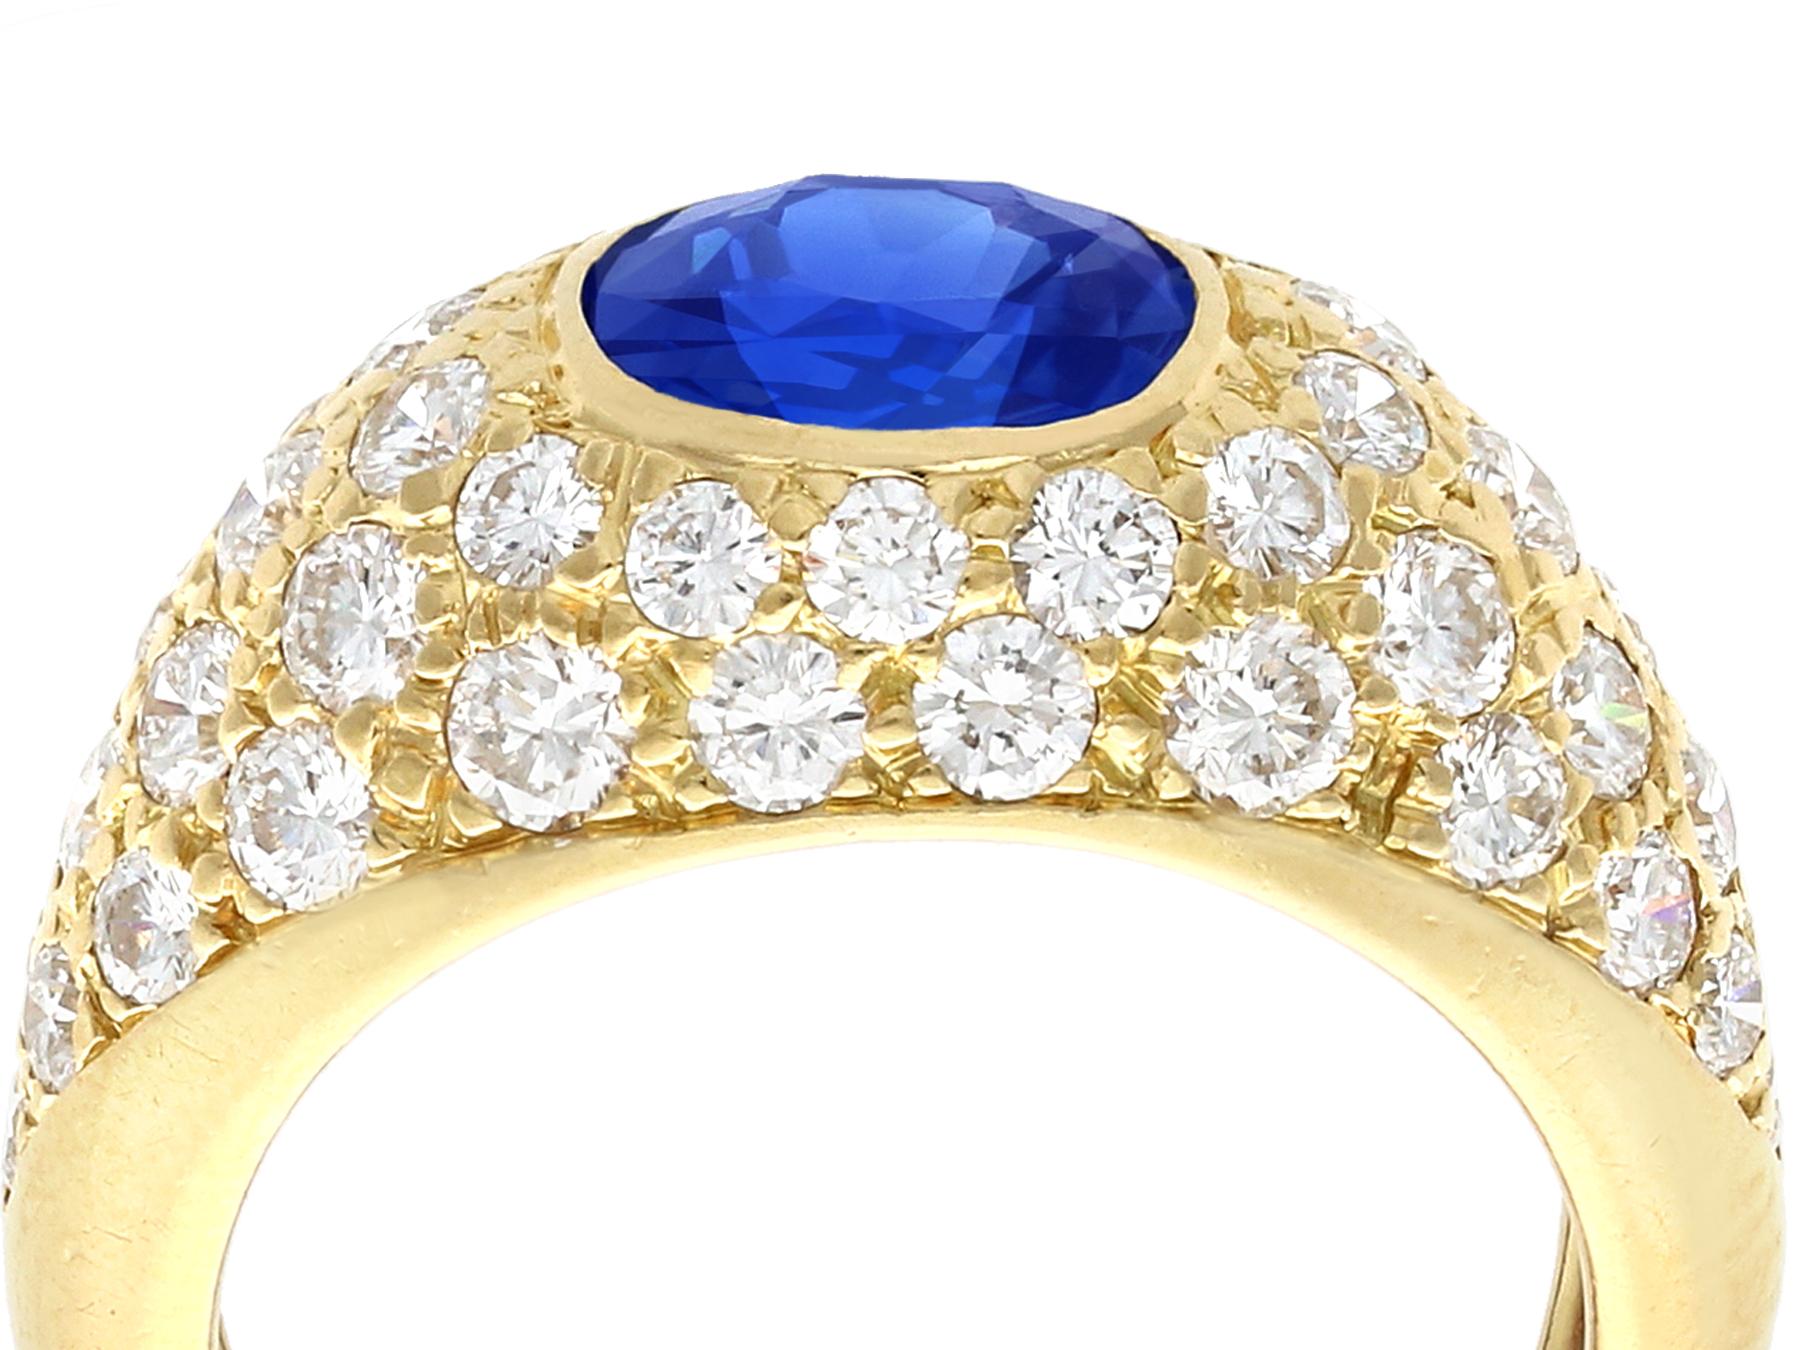 A fine and impressive vintage 1.60 carat blue sapphire and 1.20 carat diamond (total), 18 karat yellow gold dress ring; part of our diverse vintage jewelry and estate jewelry collections

This fine and impressive oval cut sapphire and diamond